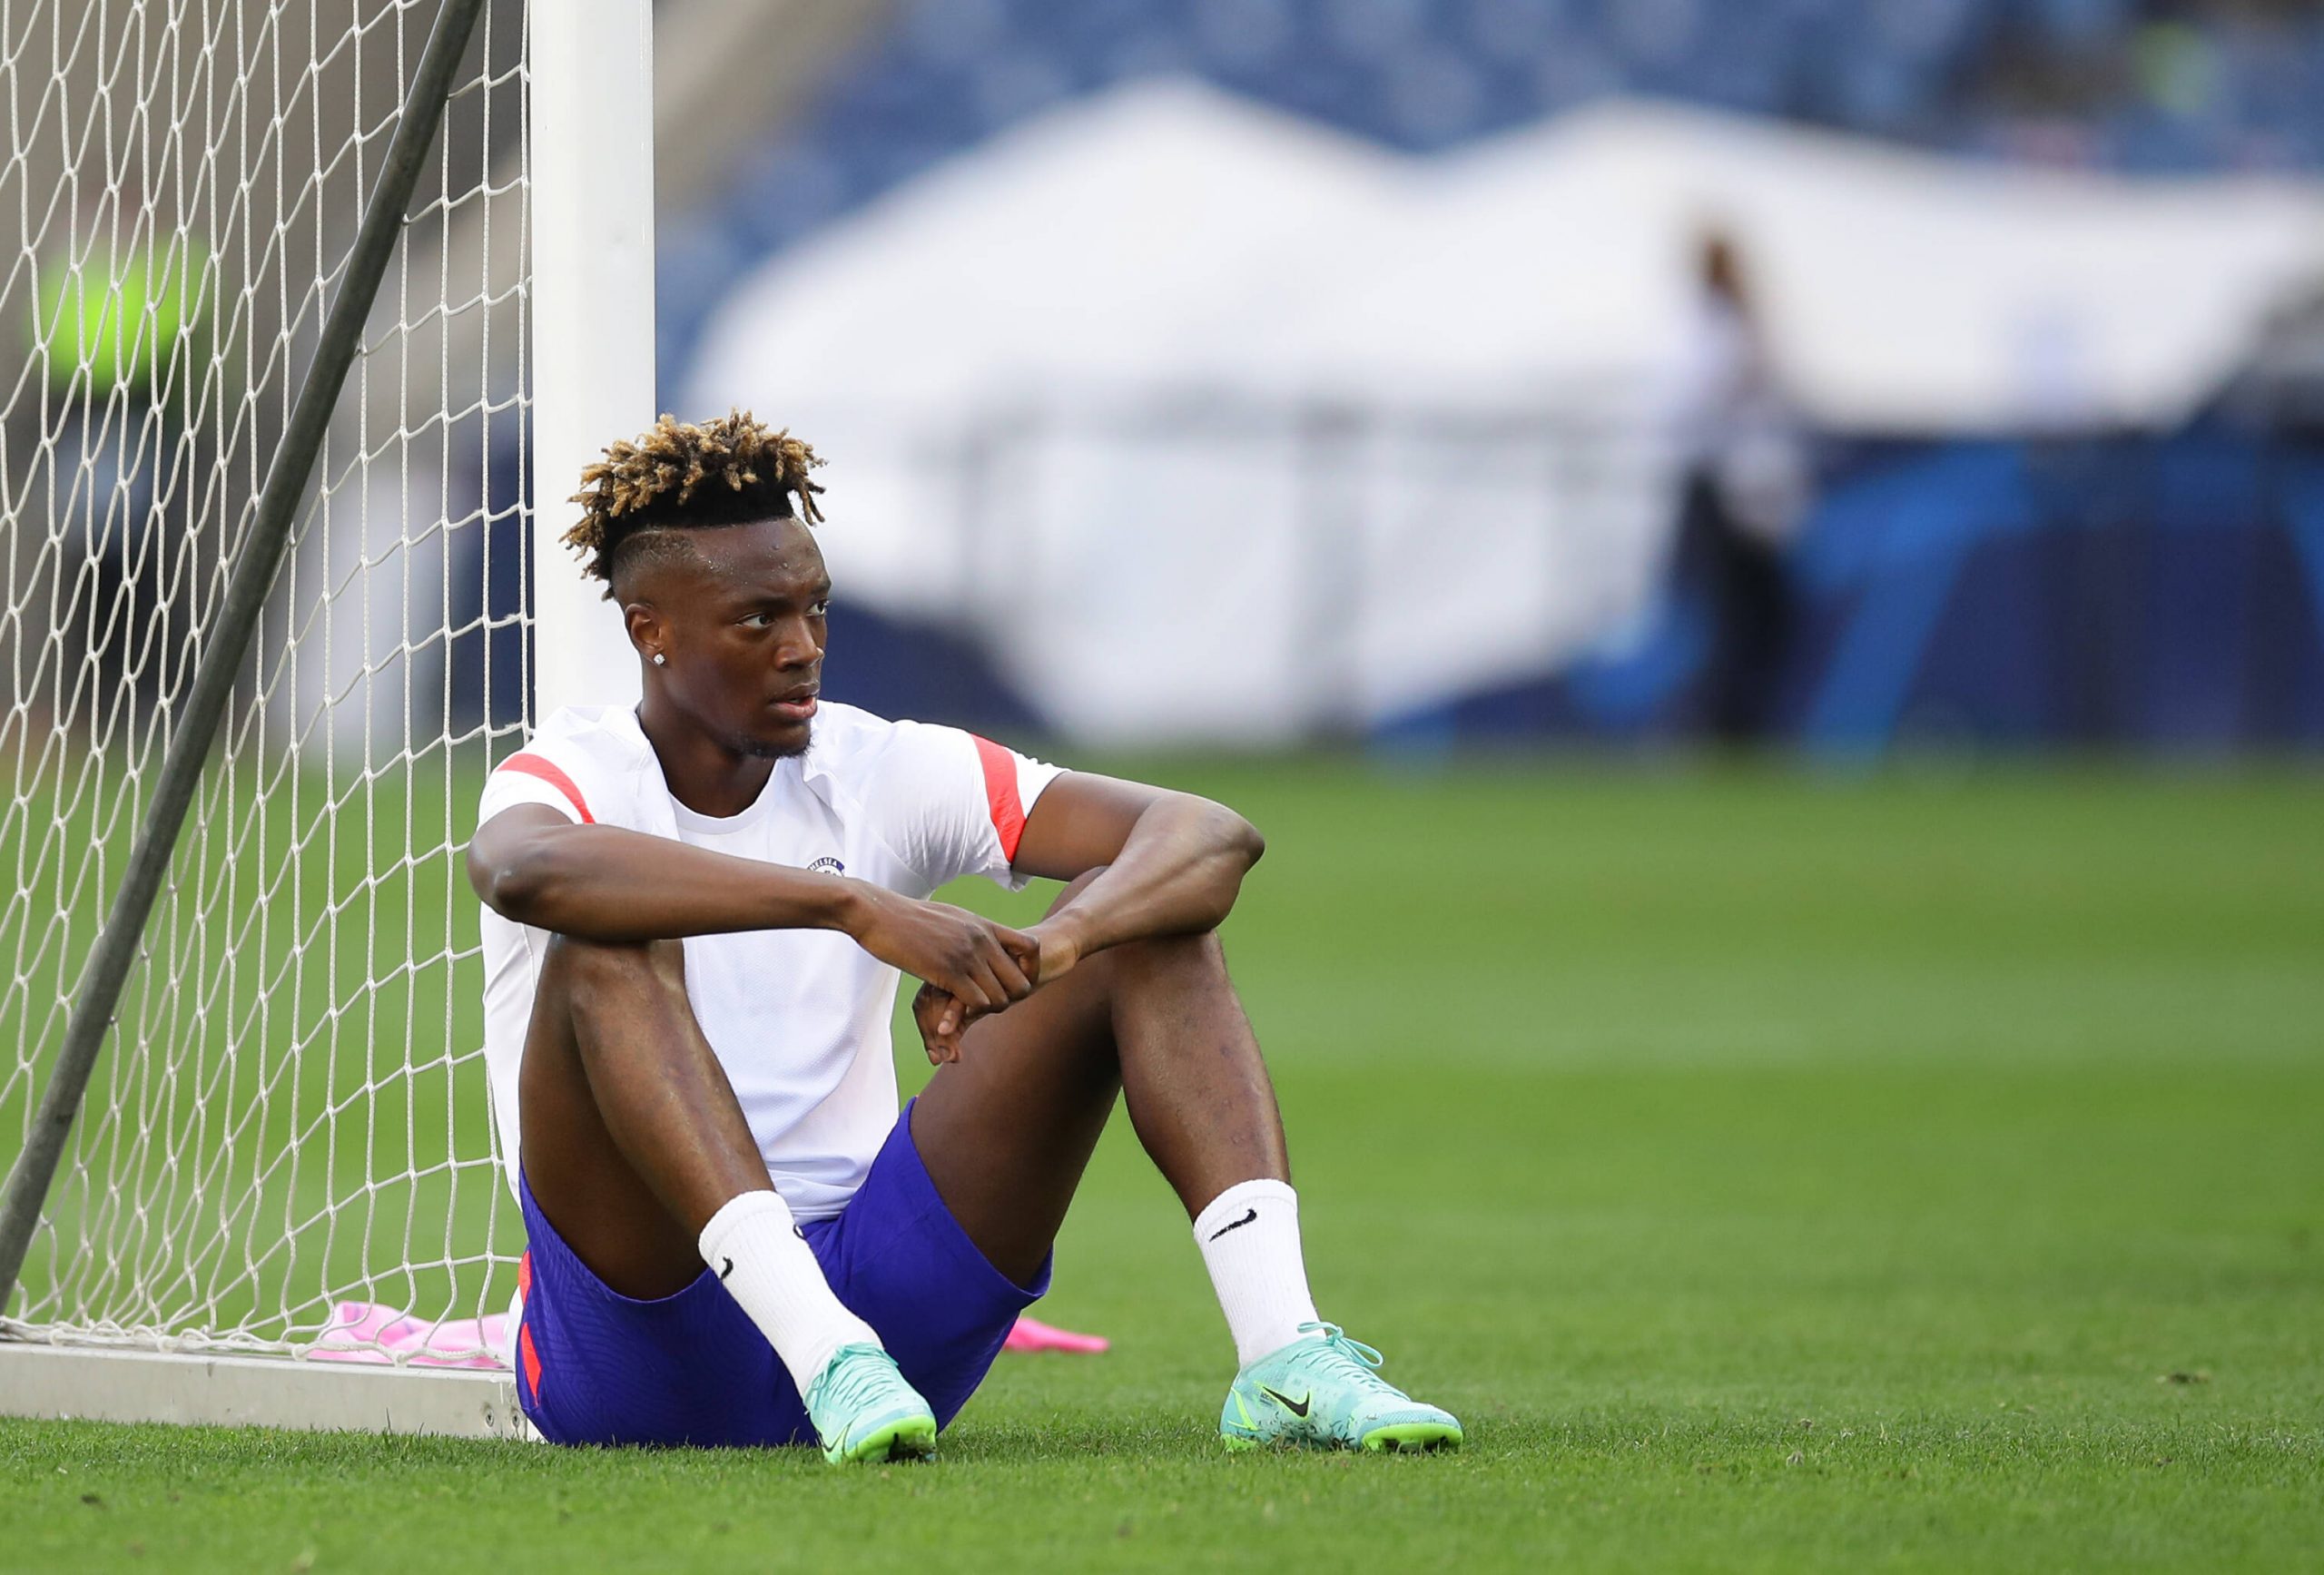 Porto, Portugal, 28th May 2021. Tammy Abraham of Chelsea during a training session at the Estadio do Dragao, Porto. Pict